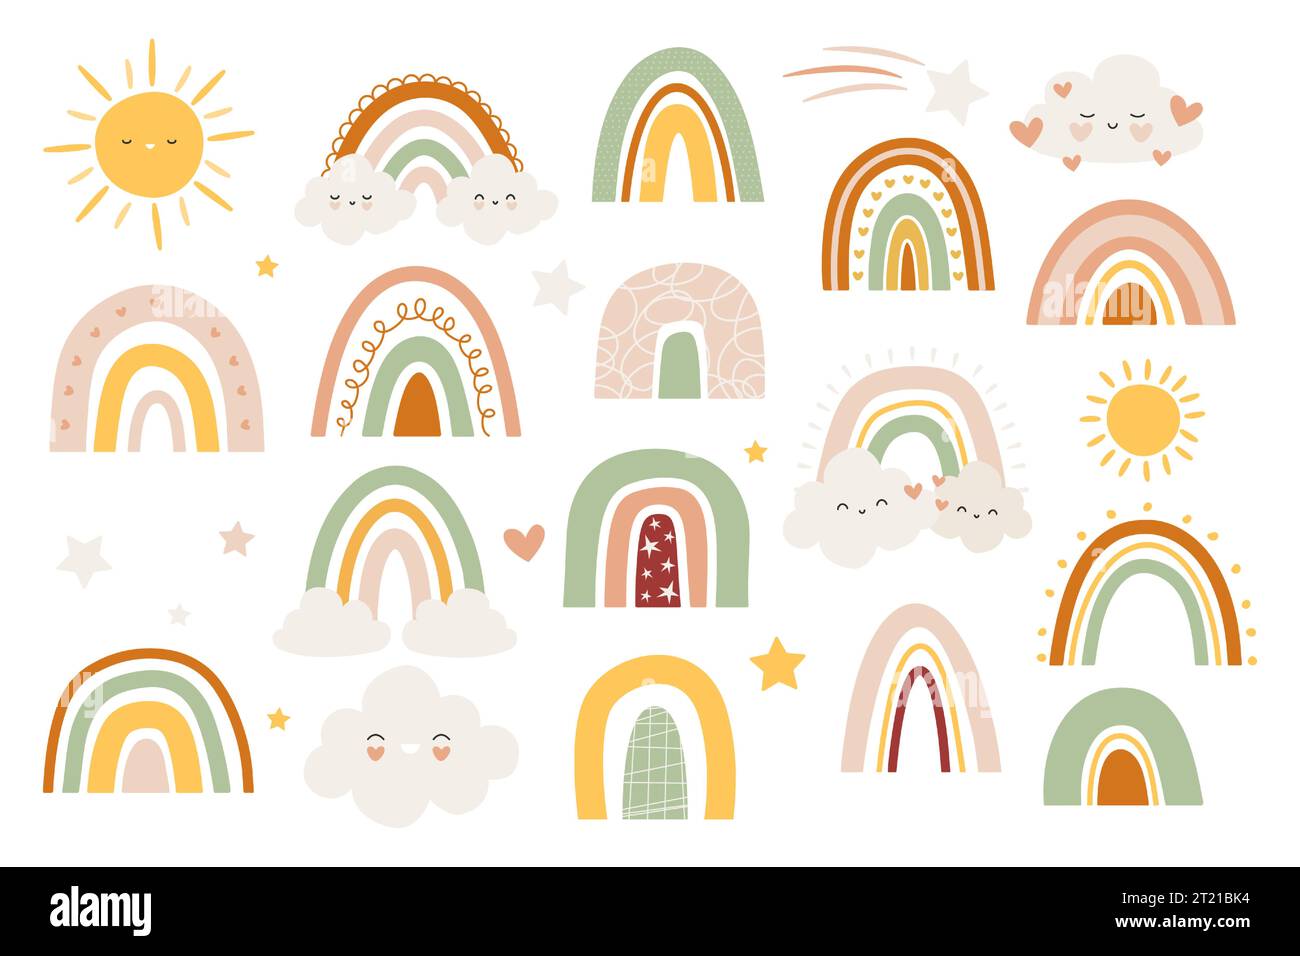 Cute rainbow cloud sun. Abstract hand drawn colorful meteorological symbols, childish boho abstract sky elements for wrapping wallpaper design. Vector Stock Vector